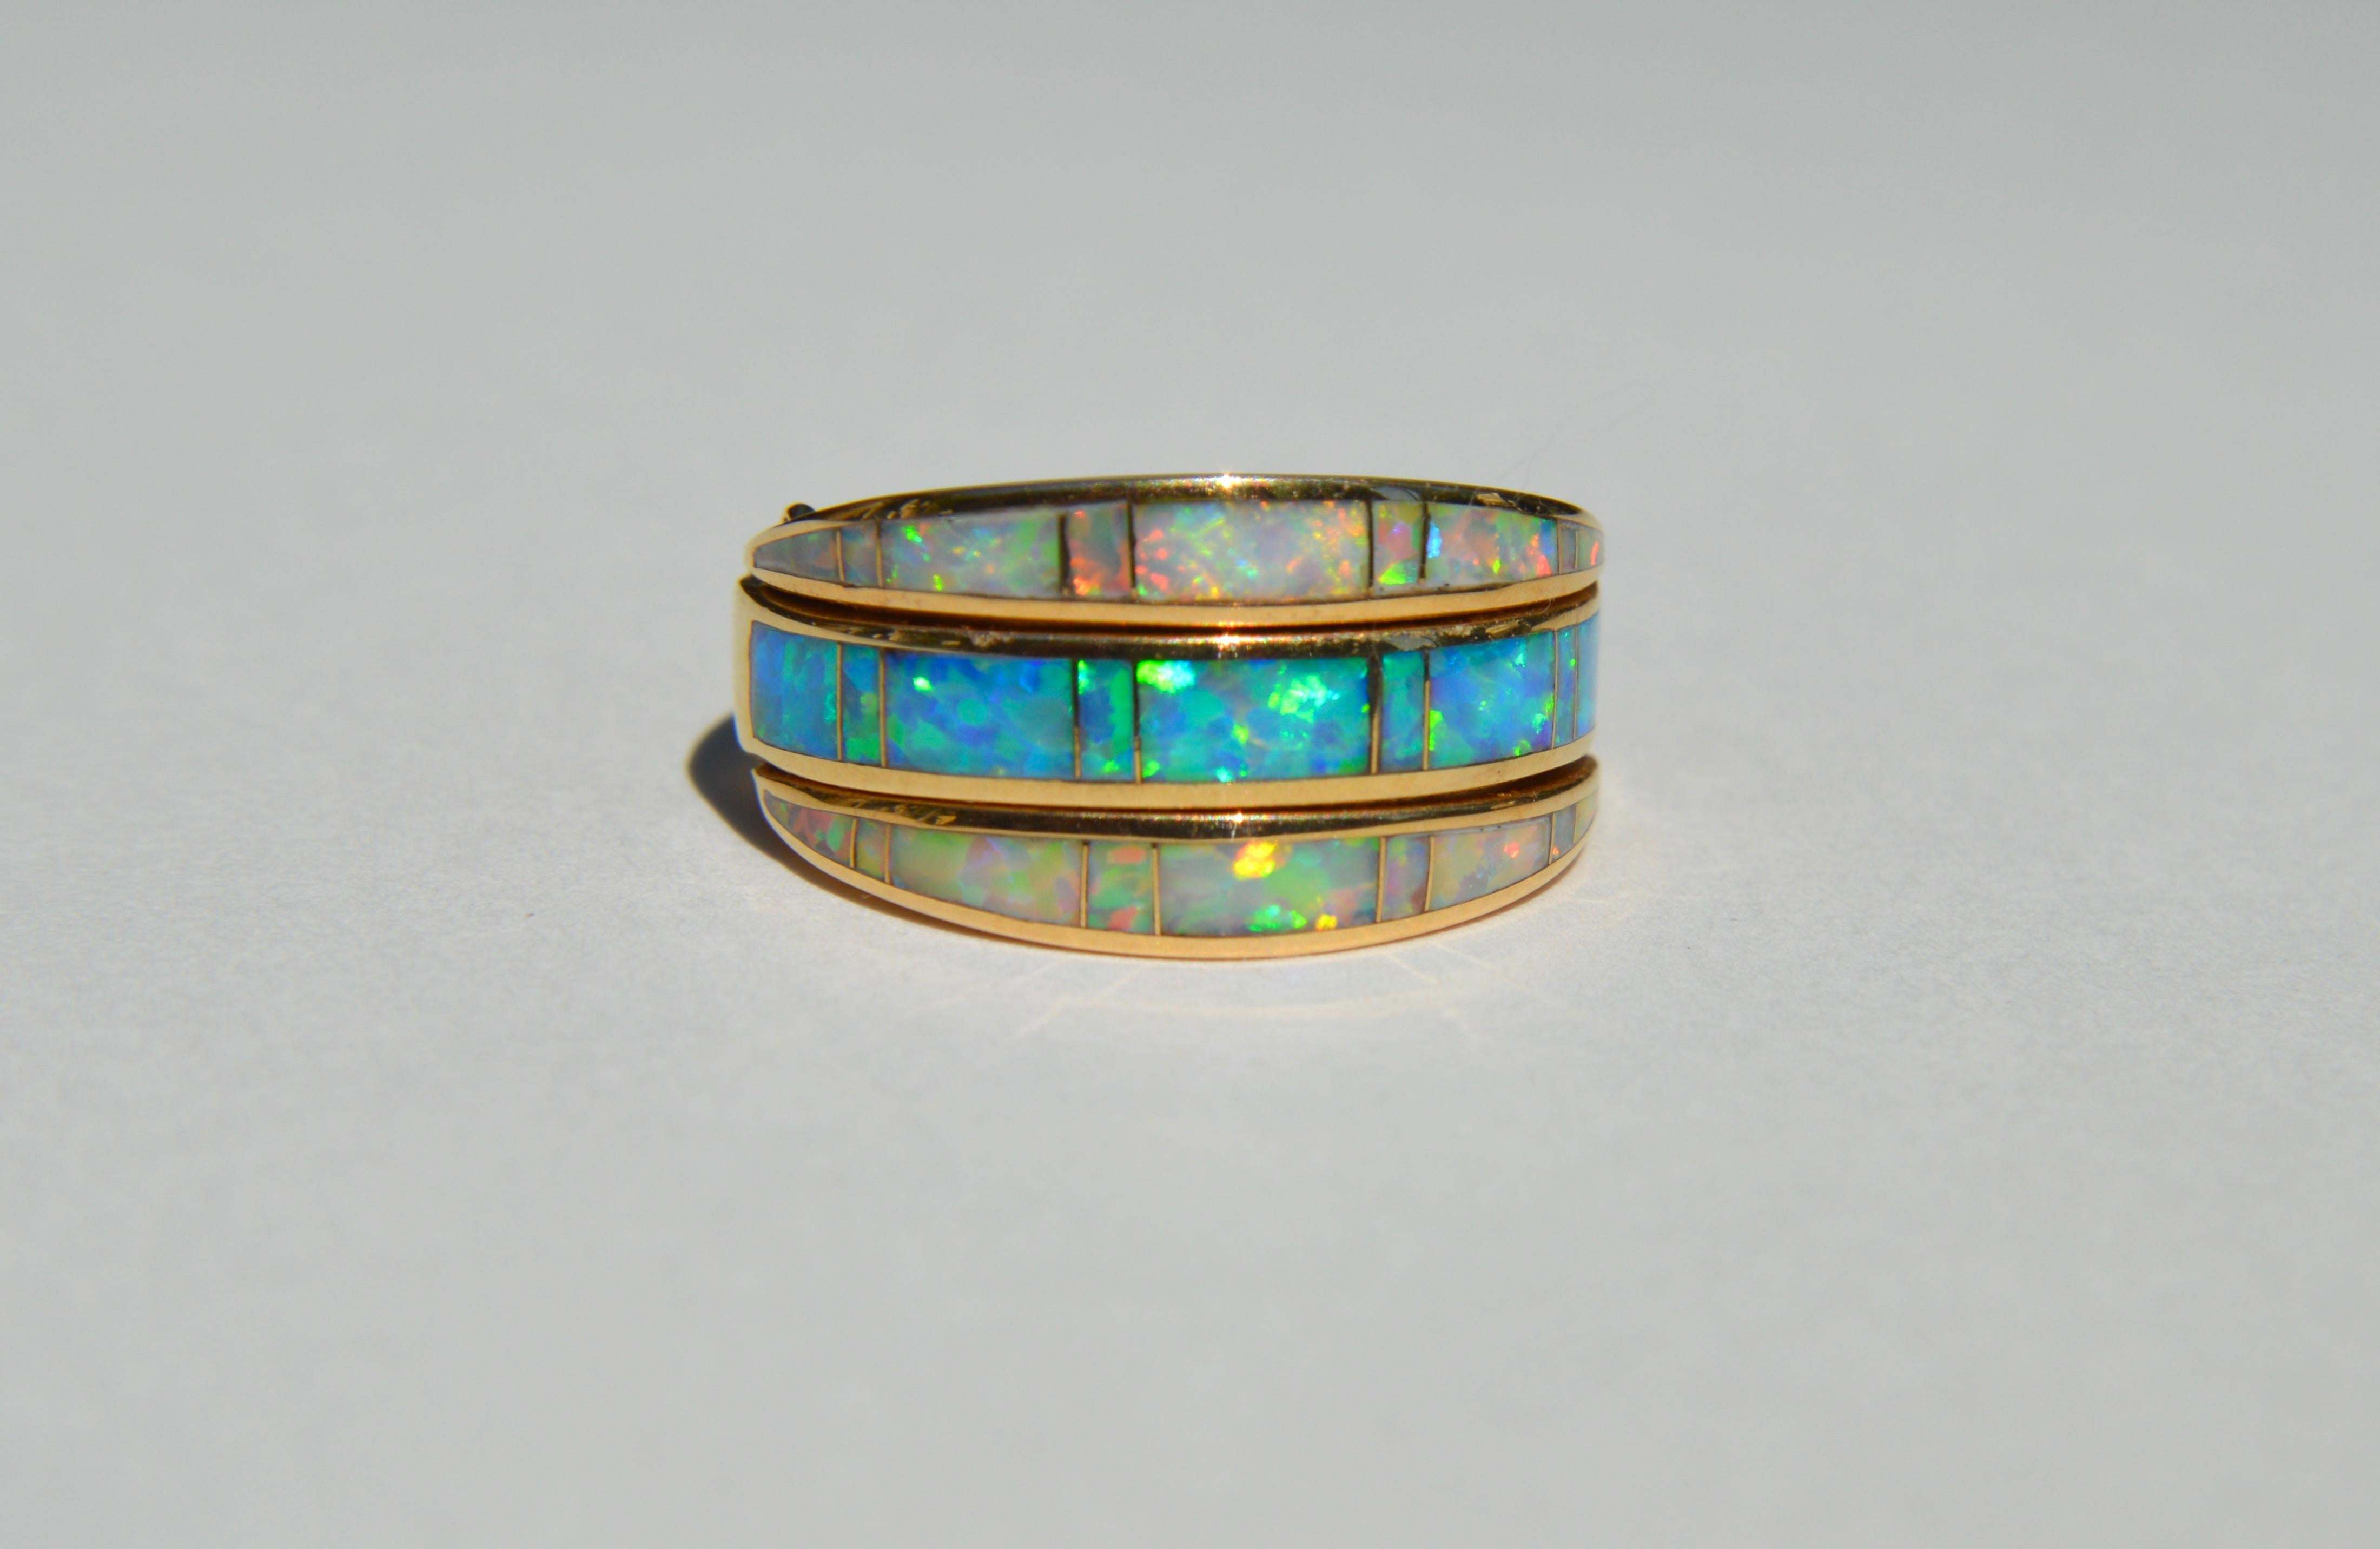 Lovely vintage Midcentury era circa 1970s Australian opal 14K yellow gold flip band bring. Size 5, cannot be resized. Marked and tested as 14K gold. In very good condition. Can be worn two different ways. The opals are exceptionally fiery and full